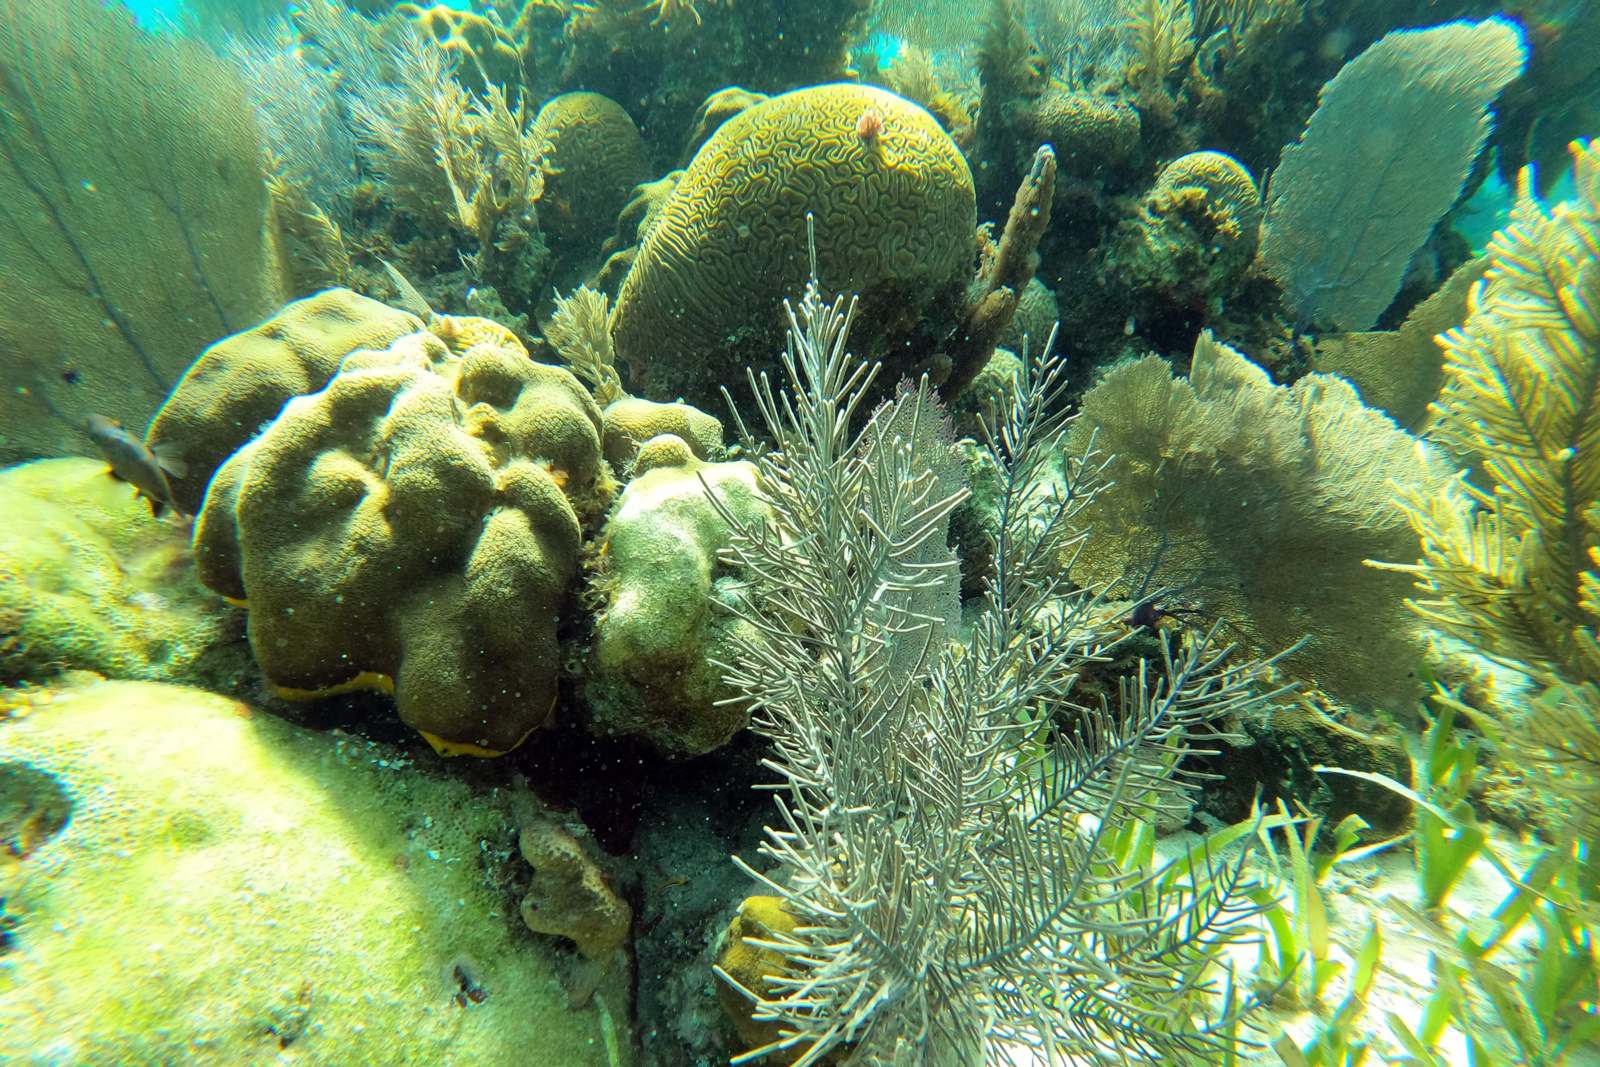 coral plants and corals in the water